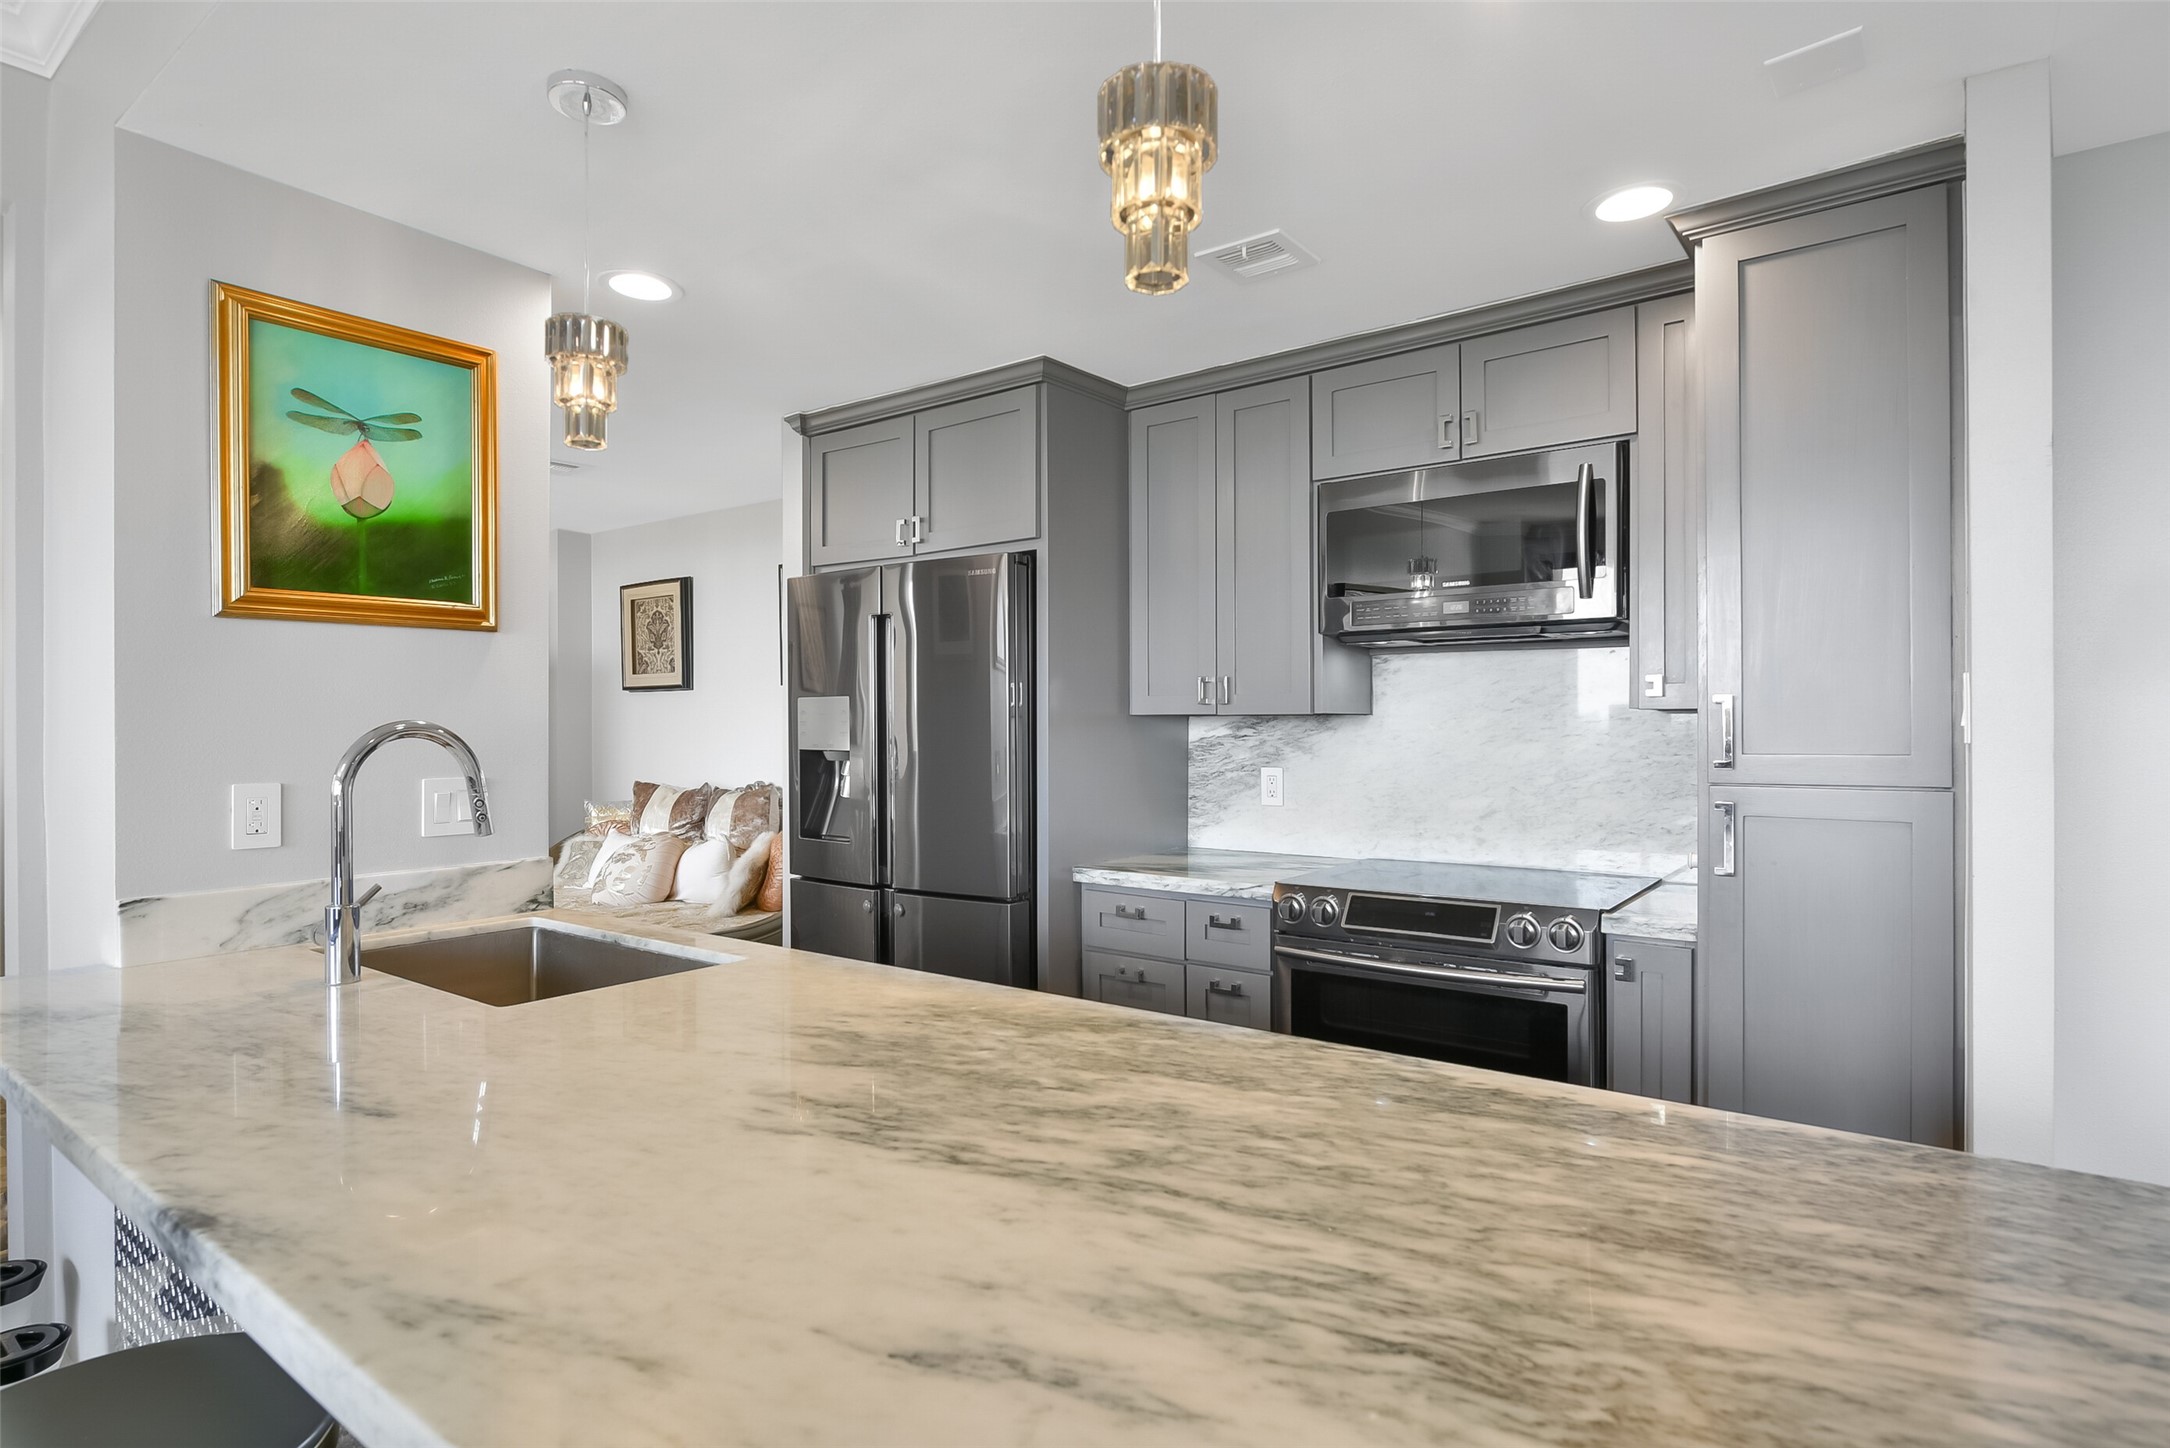 The kitchen features custom cabinets, marble waterfall island, stainless appliances and pendant lighting.